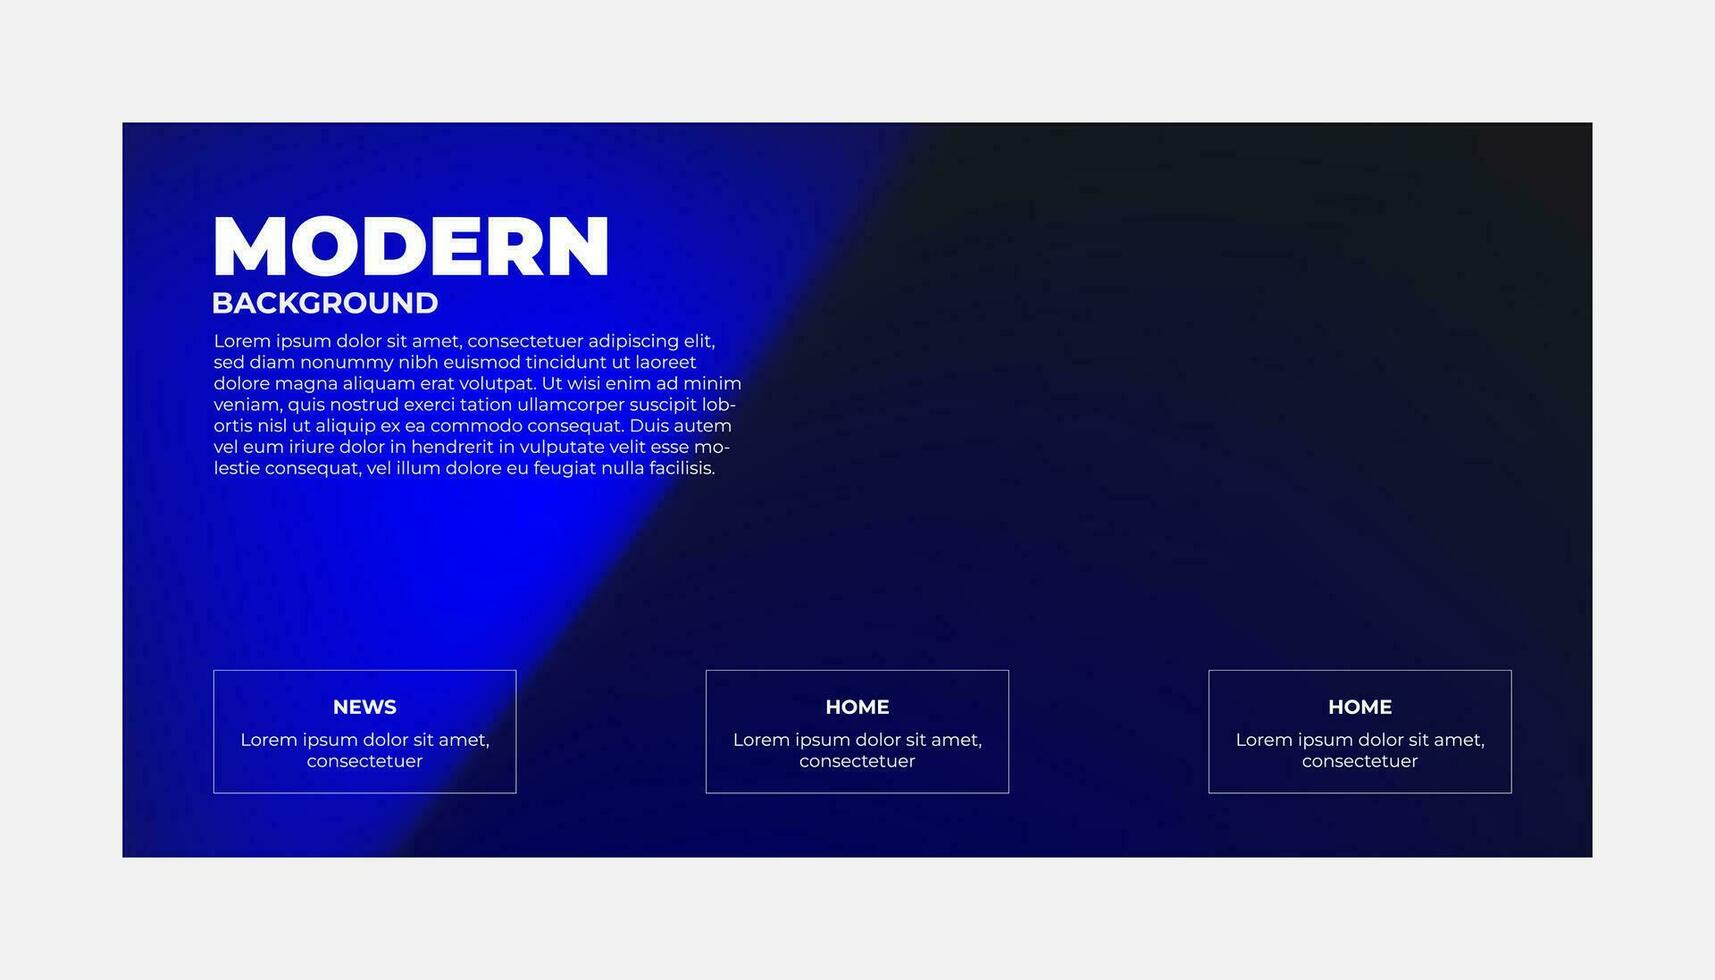 Modern Background Design with Gradient and Minimalist Gradient Background with geometric shapes for Website design, landing page, wallpaper, banner, poster, flyer, and presentation vector